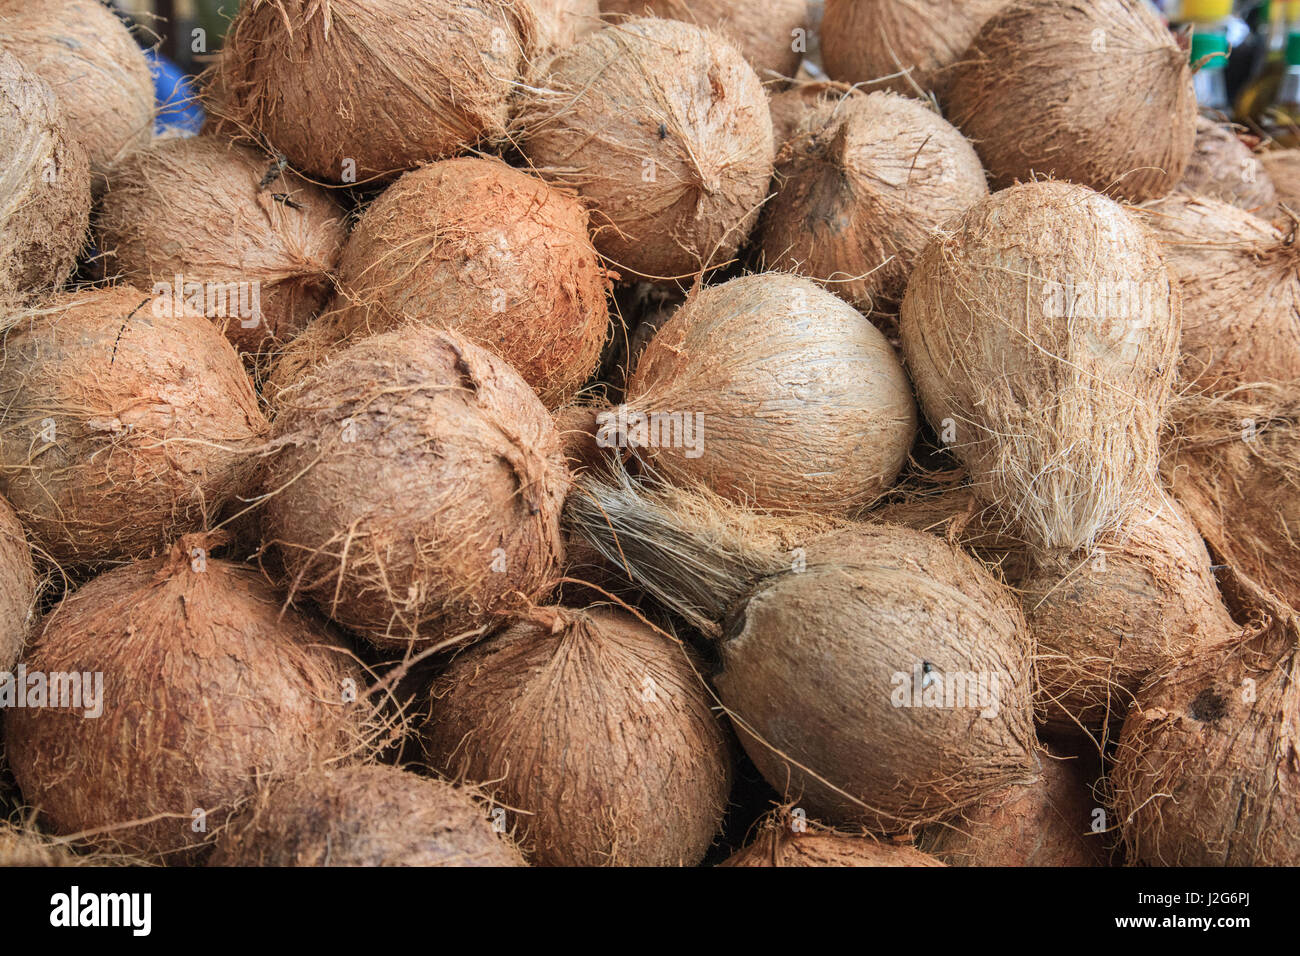 Located in the Mercado Modelo of Chiclayo are many fresh produce stalls, this one featuring coconuts. Stock Photo